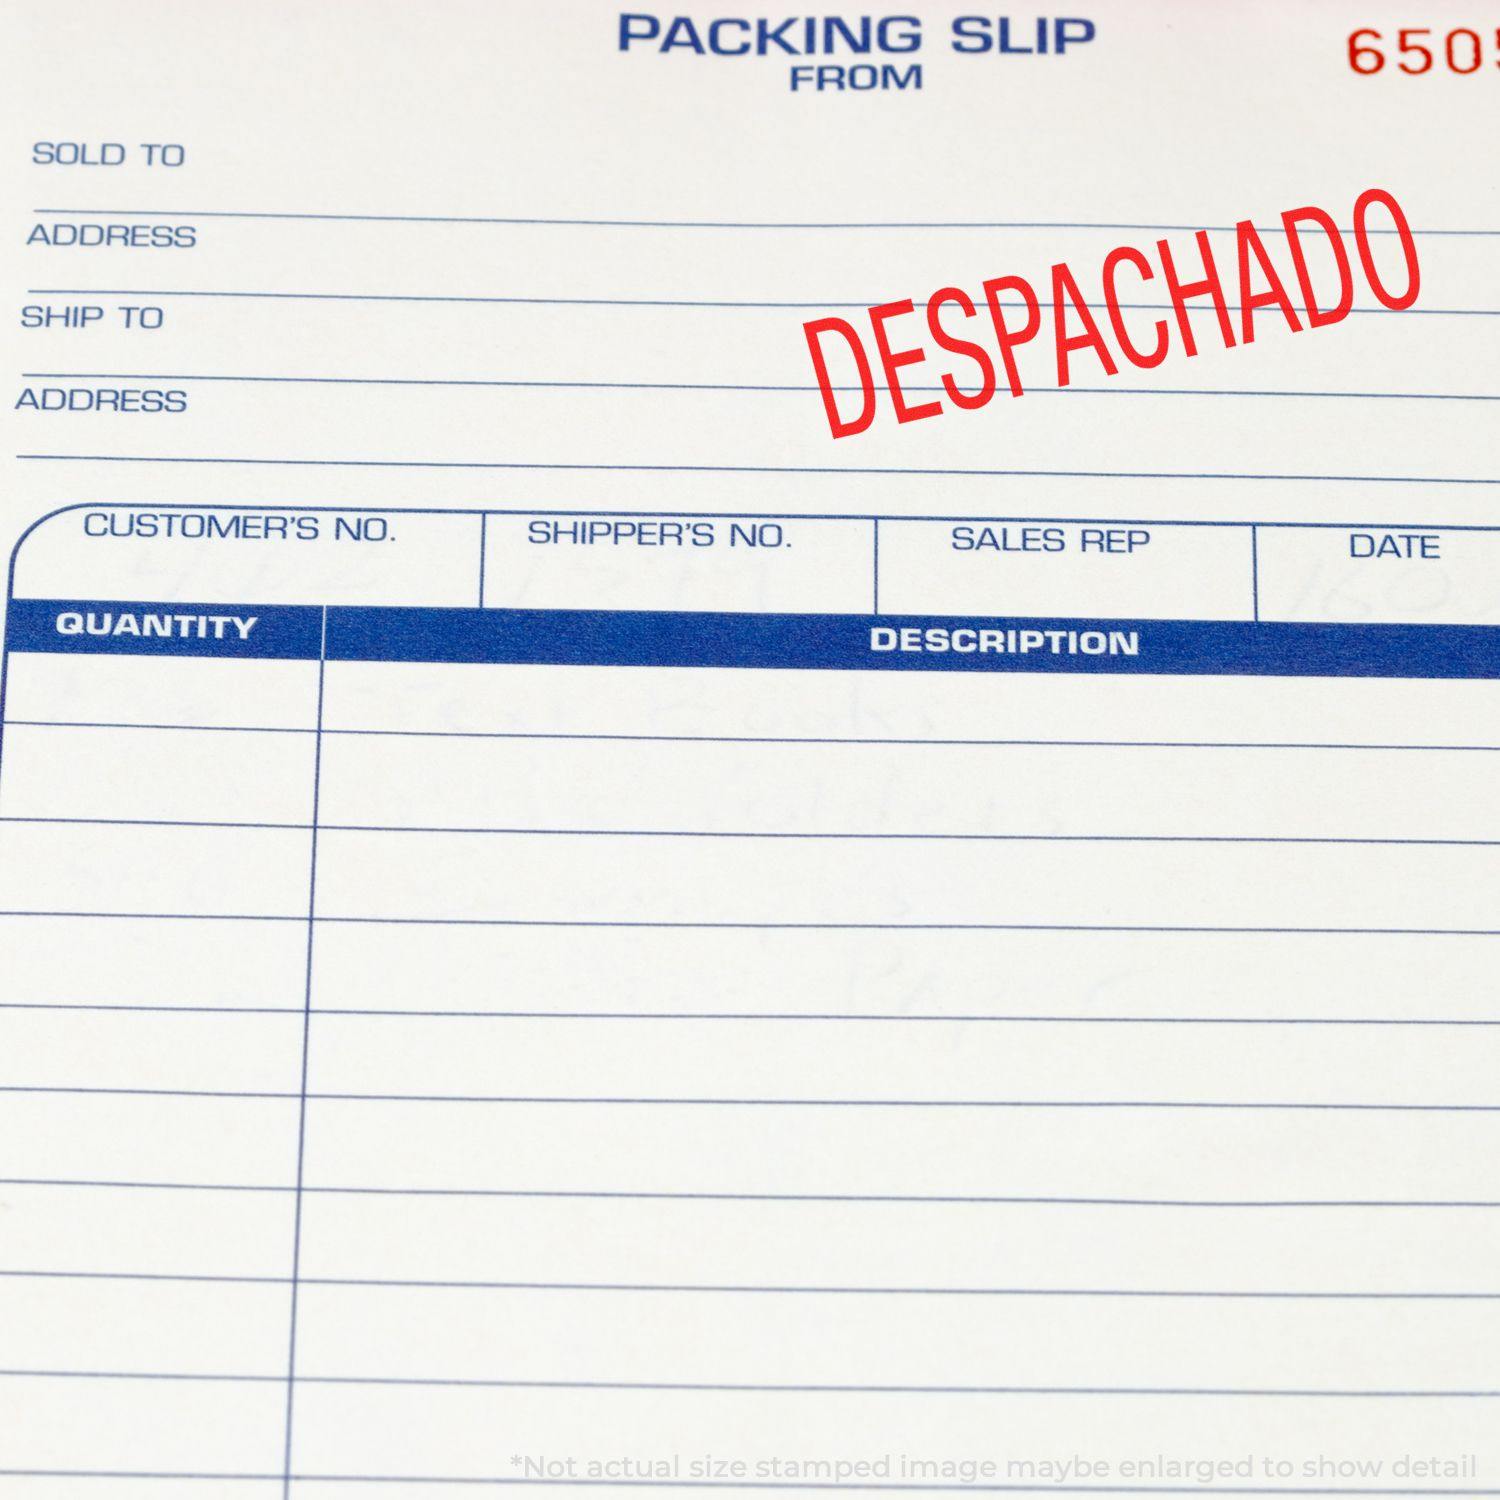 A self-inking stamp with a stamped image showing how the text "DESPACHADO" in a large font is displayed by it after stamping.